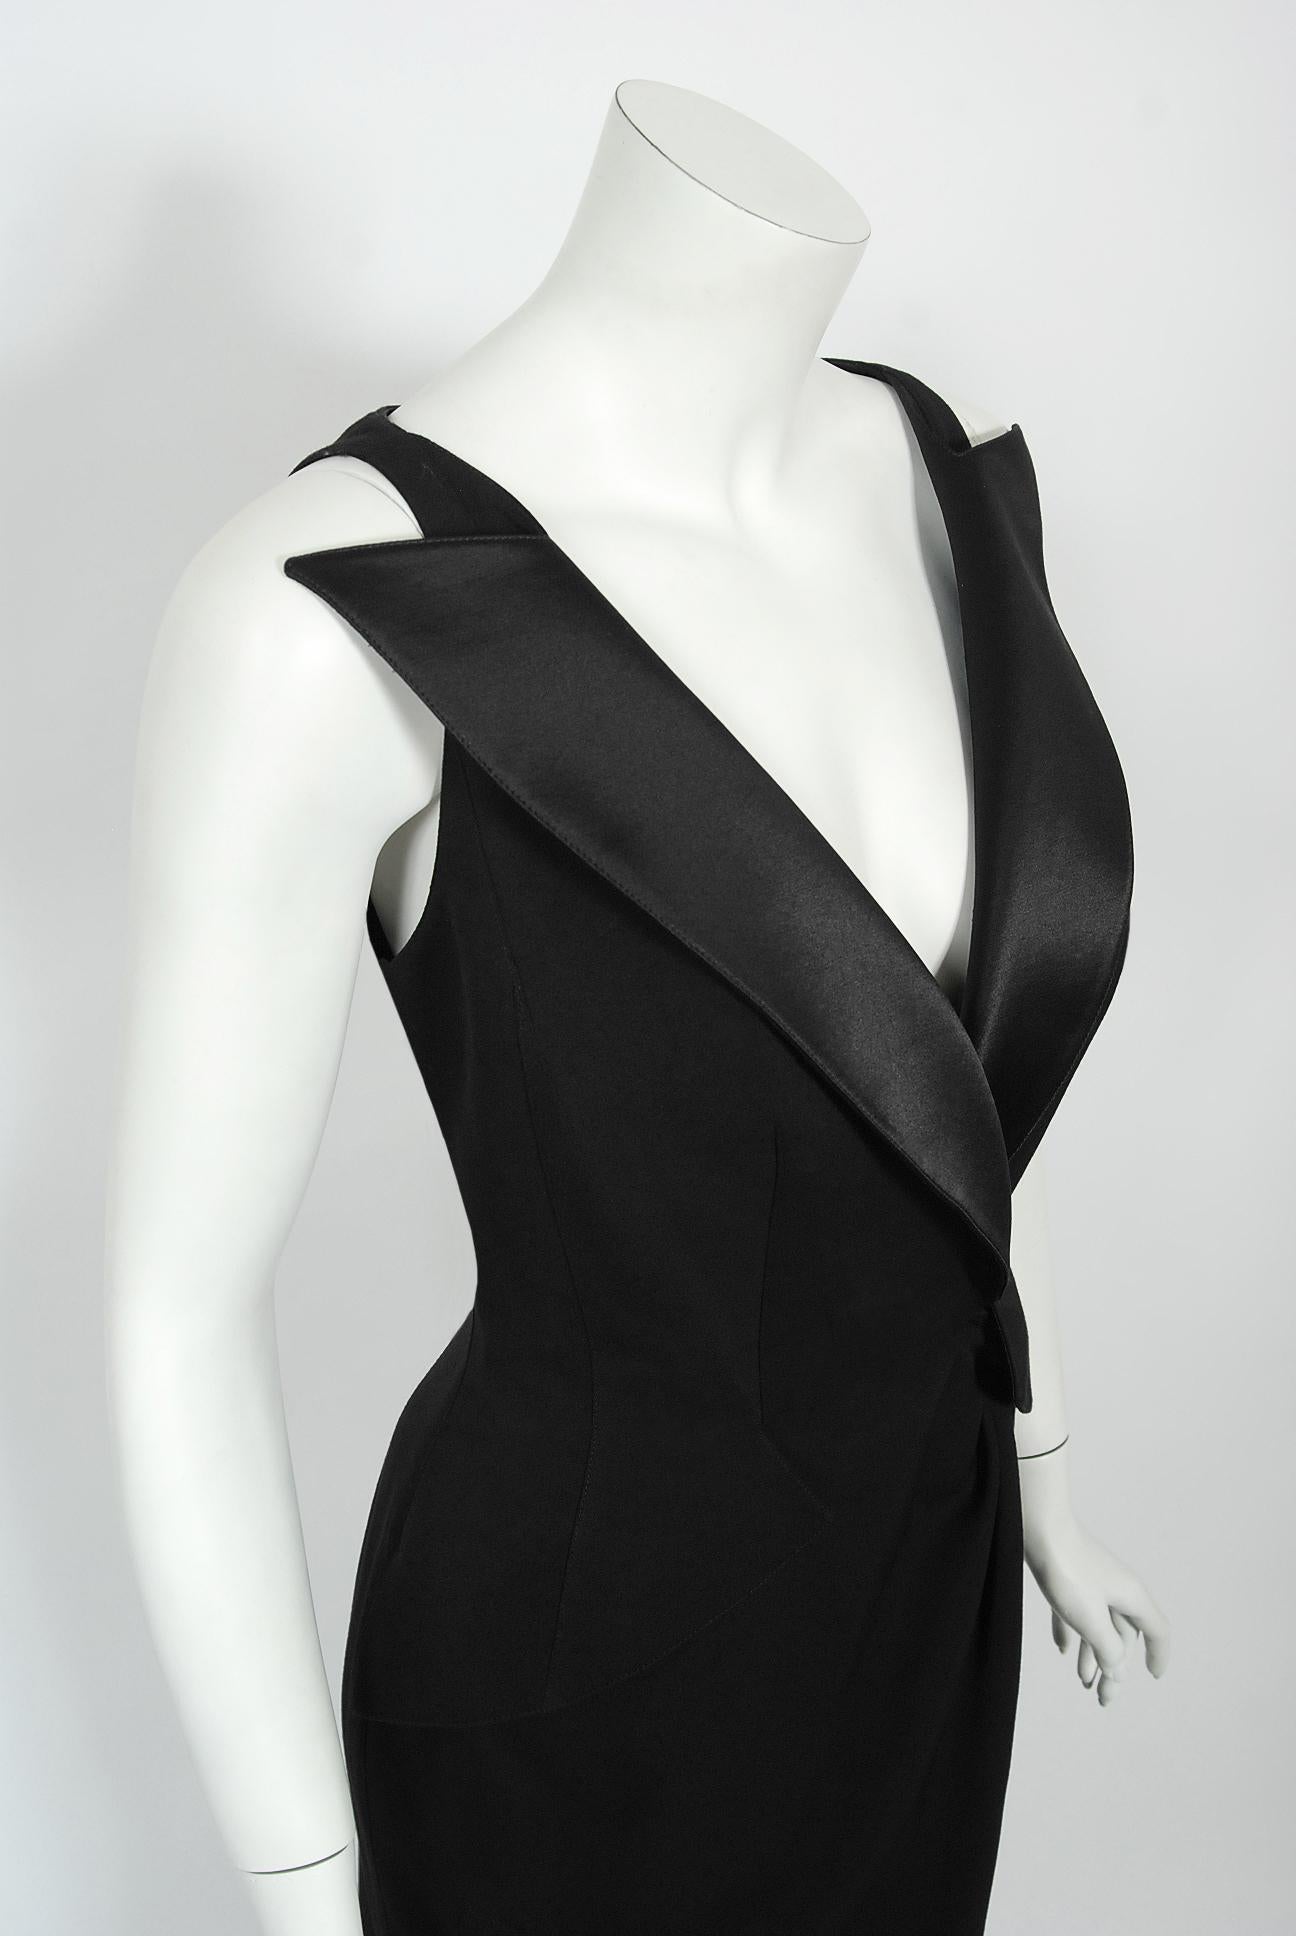 Vintage 1999 Thierry Mugler Couture Black Silk Bustier Low-Cut Hourglass Gown 1